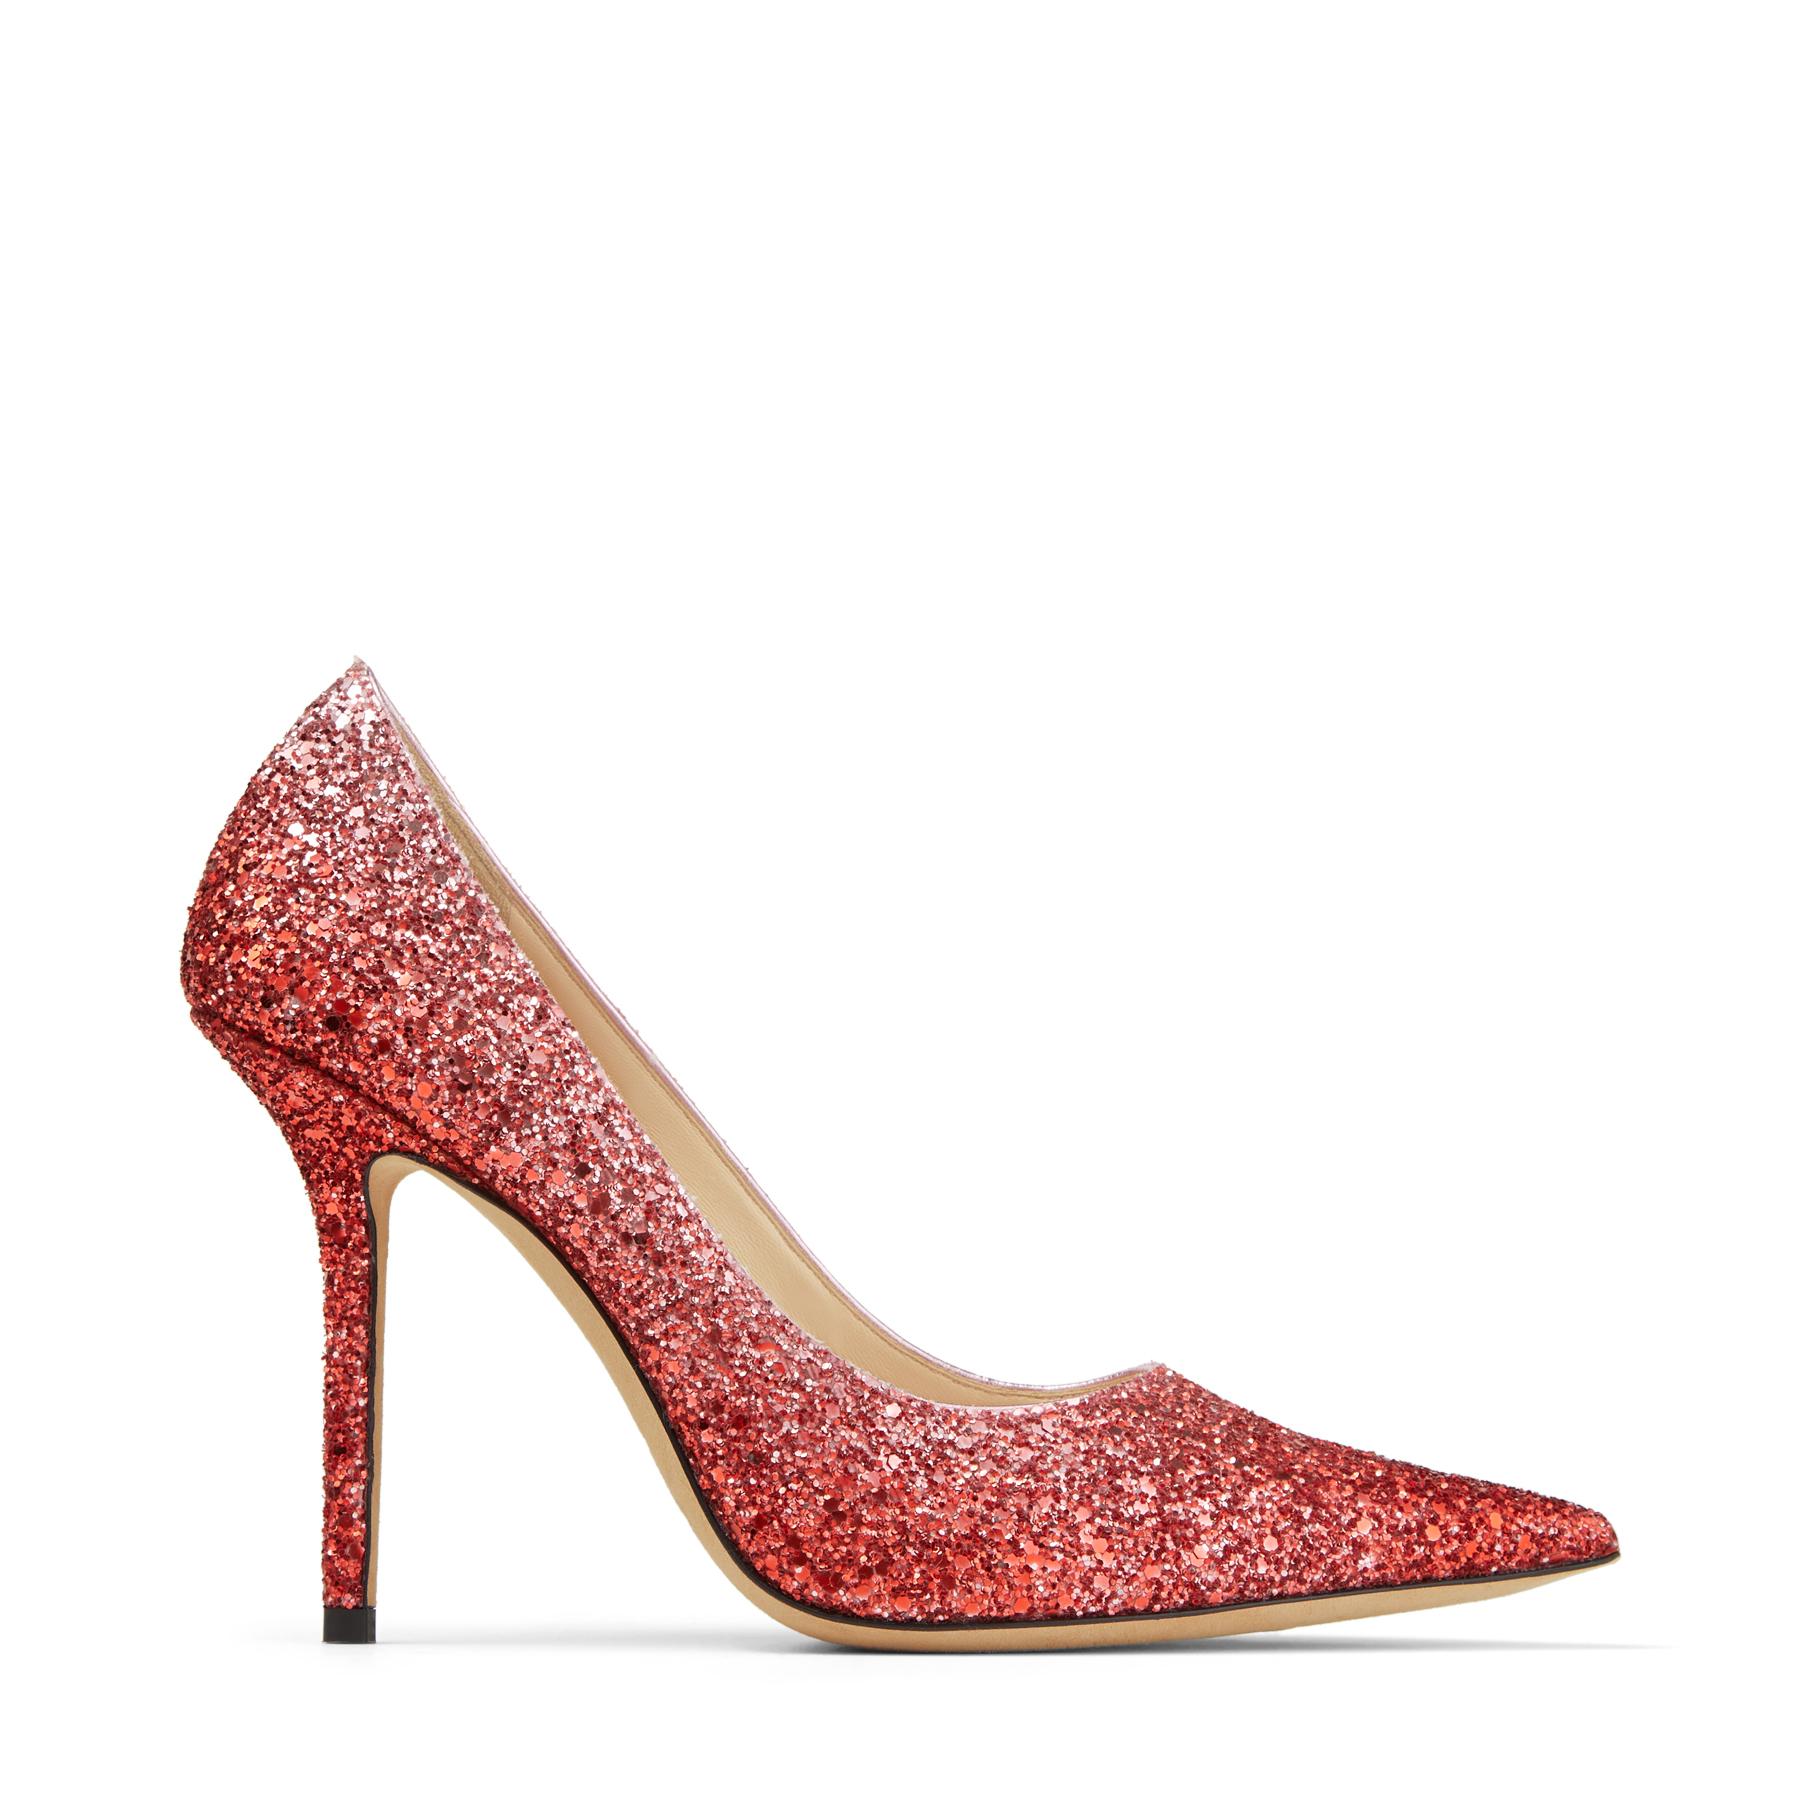 Jimmy Choo Red Sparkle Shoes | lupon.gov.ph